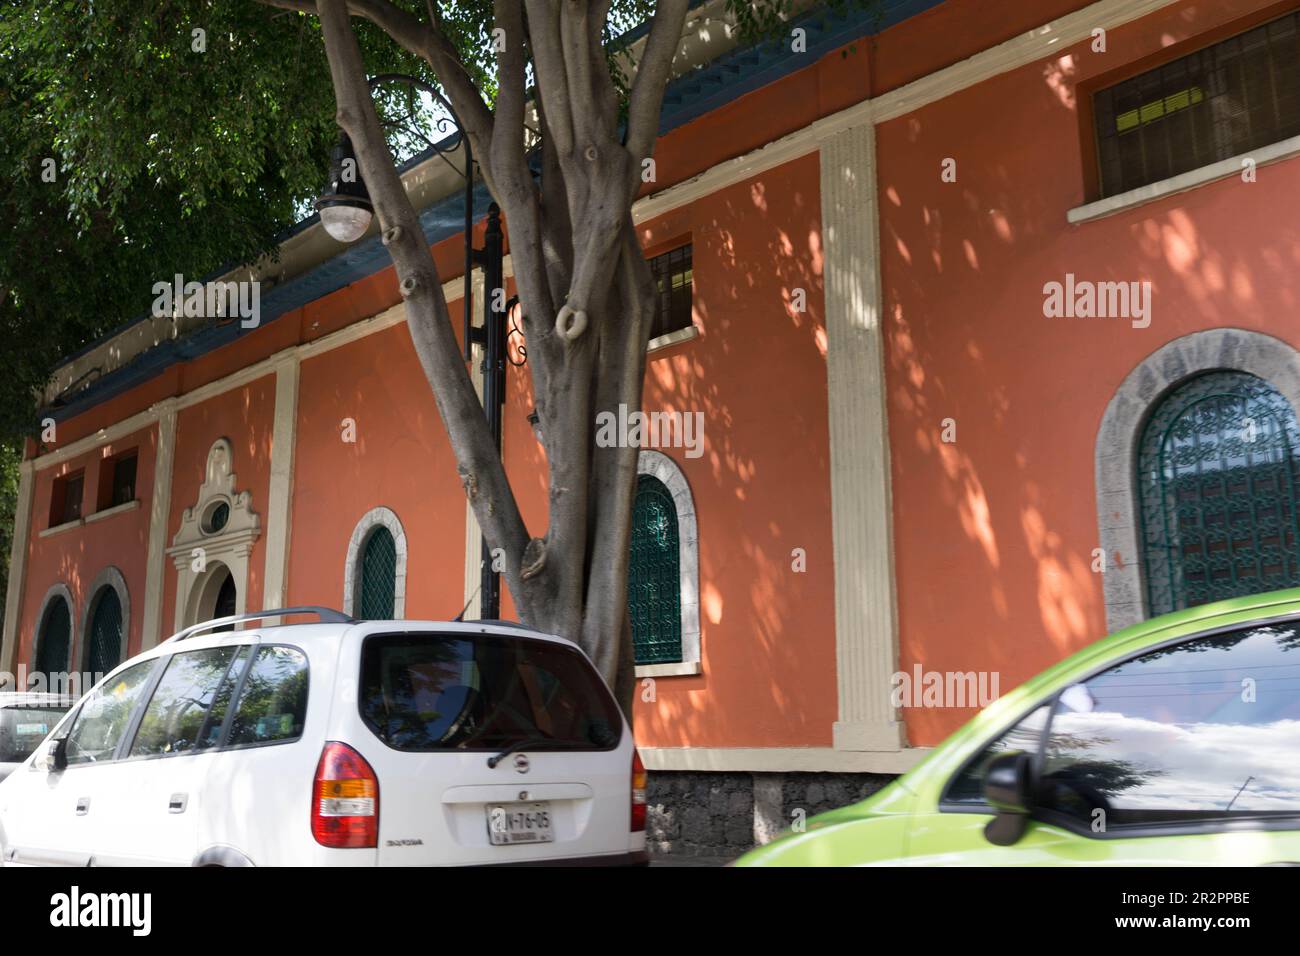 Private houses and parked cars in the Coyoacan neighborhood of Mexico City. Stock Photo